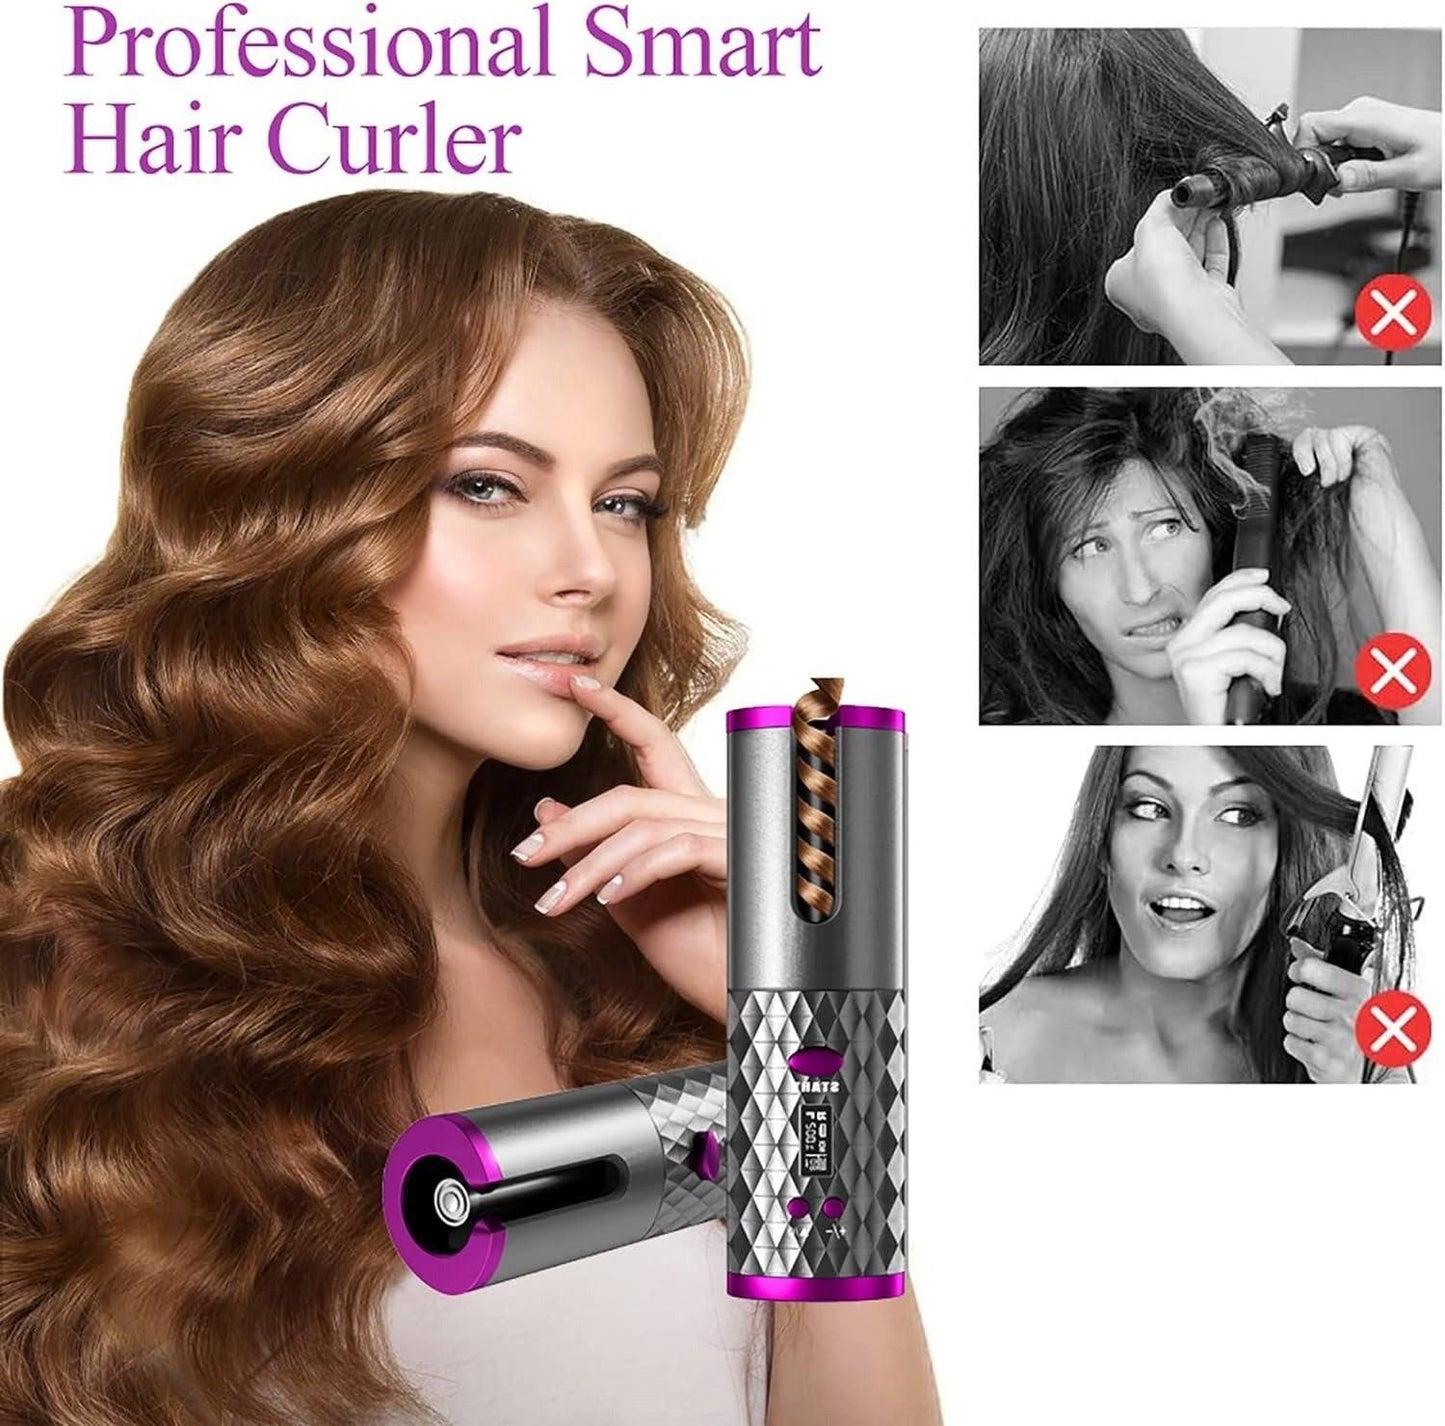 Unbound Cordless Auto Rotating Ceramic Hair Curler USB Rechargeable Automatic Curling Iron LED Display Temperature Wave Curler， pink